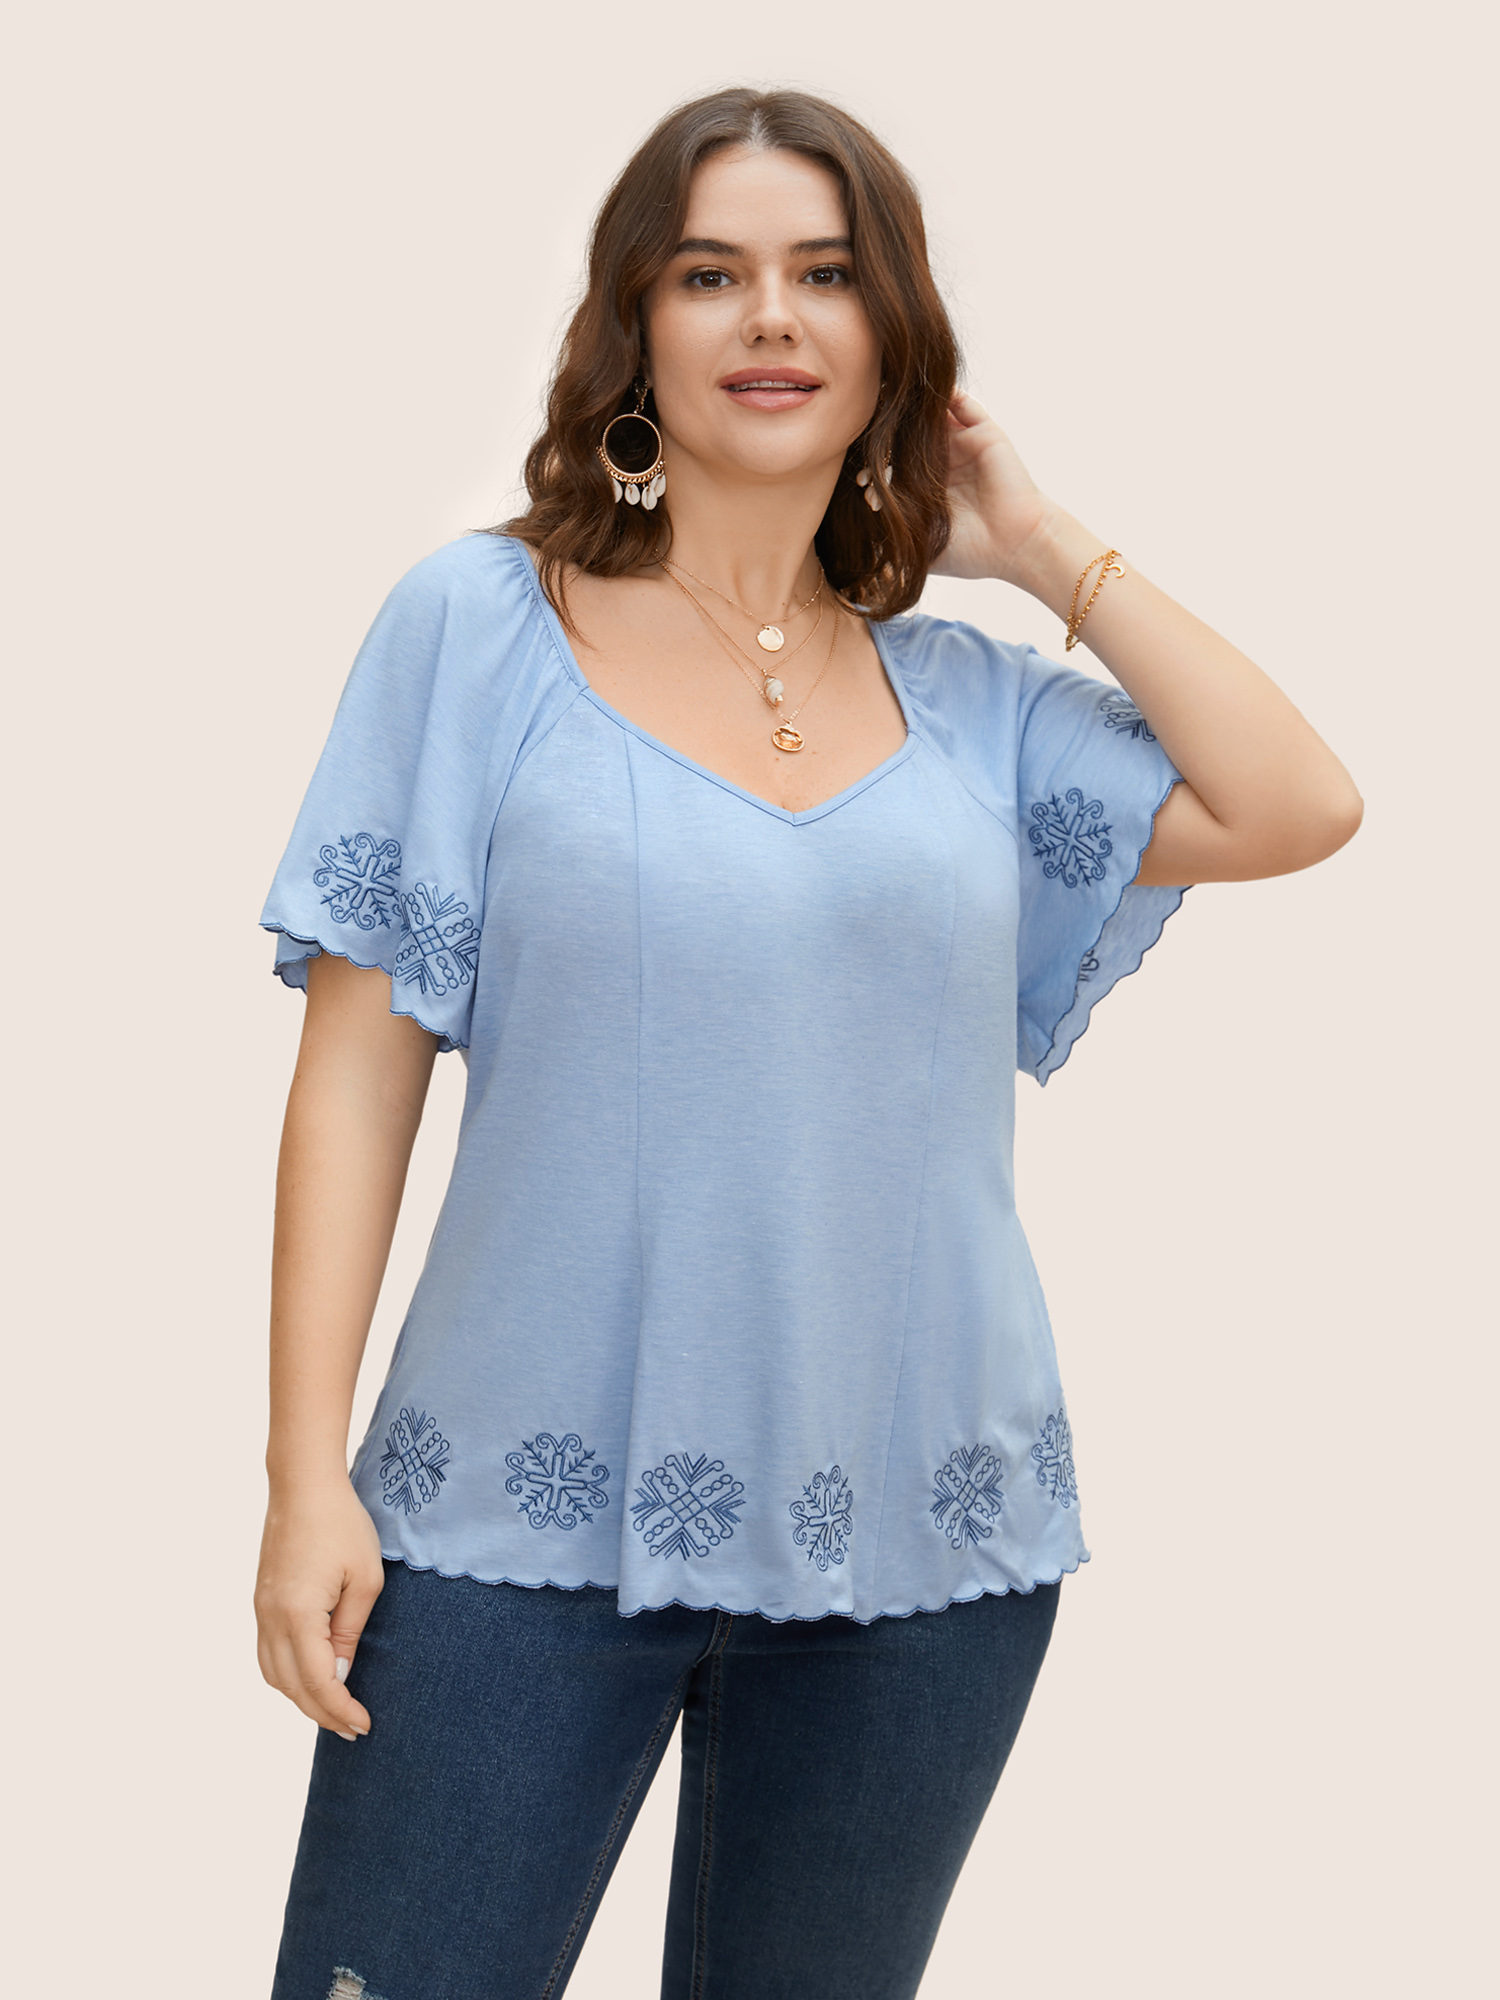 

Plus Size Bandana Floral Embroidered Ruffle Sleeve T-shirt LightBlue Women Resort Embroidered Heart neckline Vacation T-shirts BloomChic